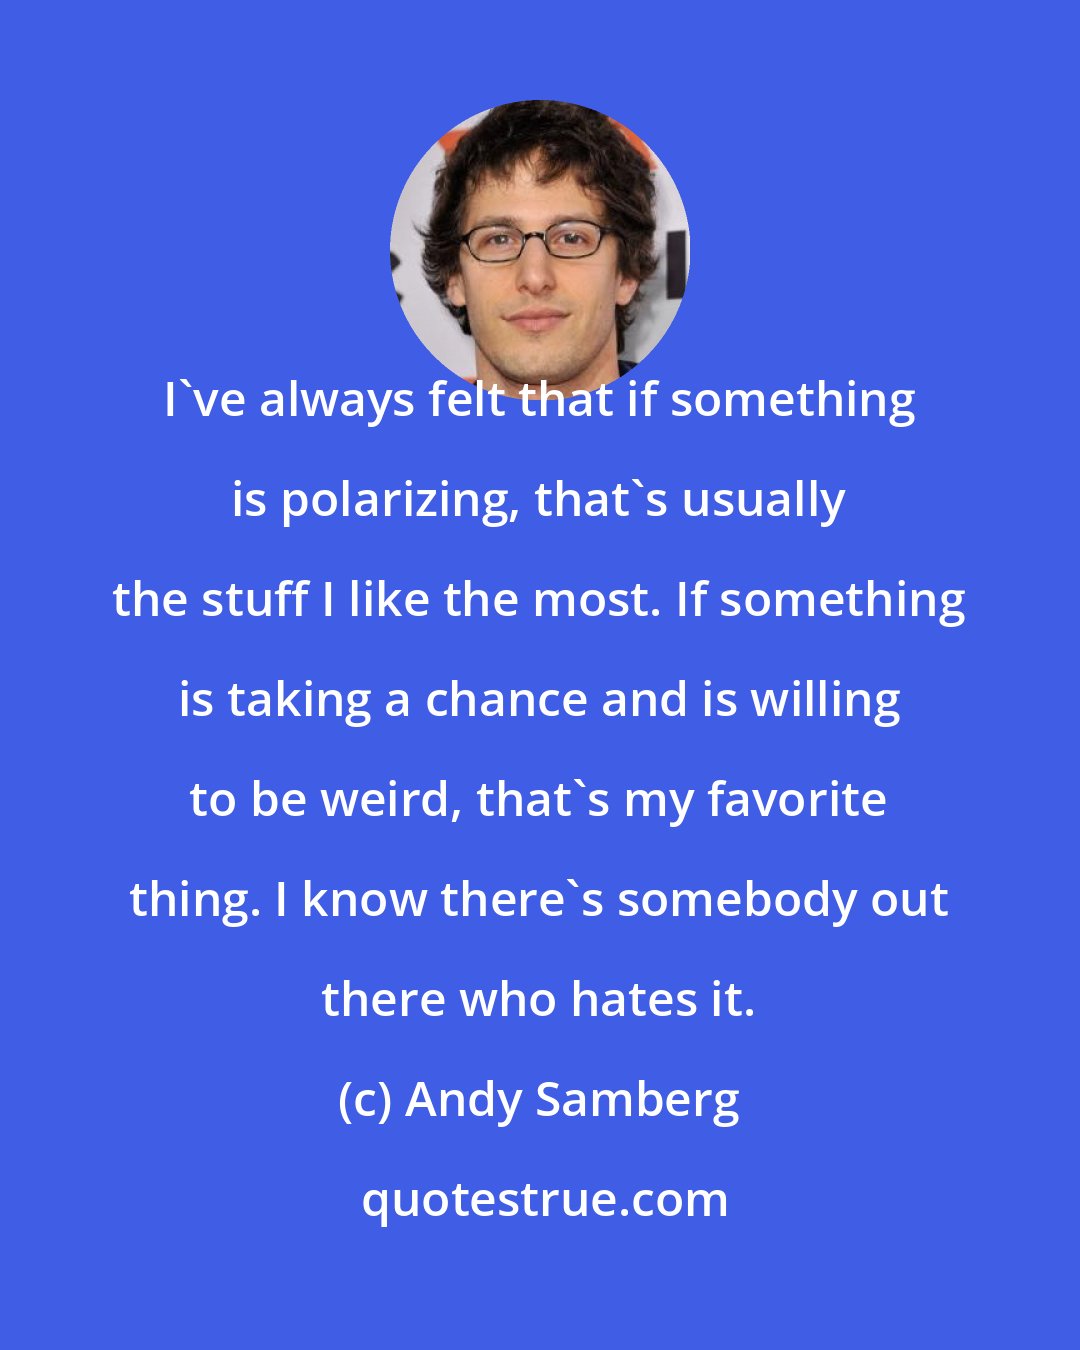 Andy Samberg: I've always felt that if something is polarizing, that's usually the stuff I like the most. If something is taking a chance and is willing to be weird, that's my favorite thing. I know there's somebody out there who hates it.